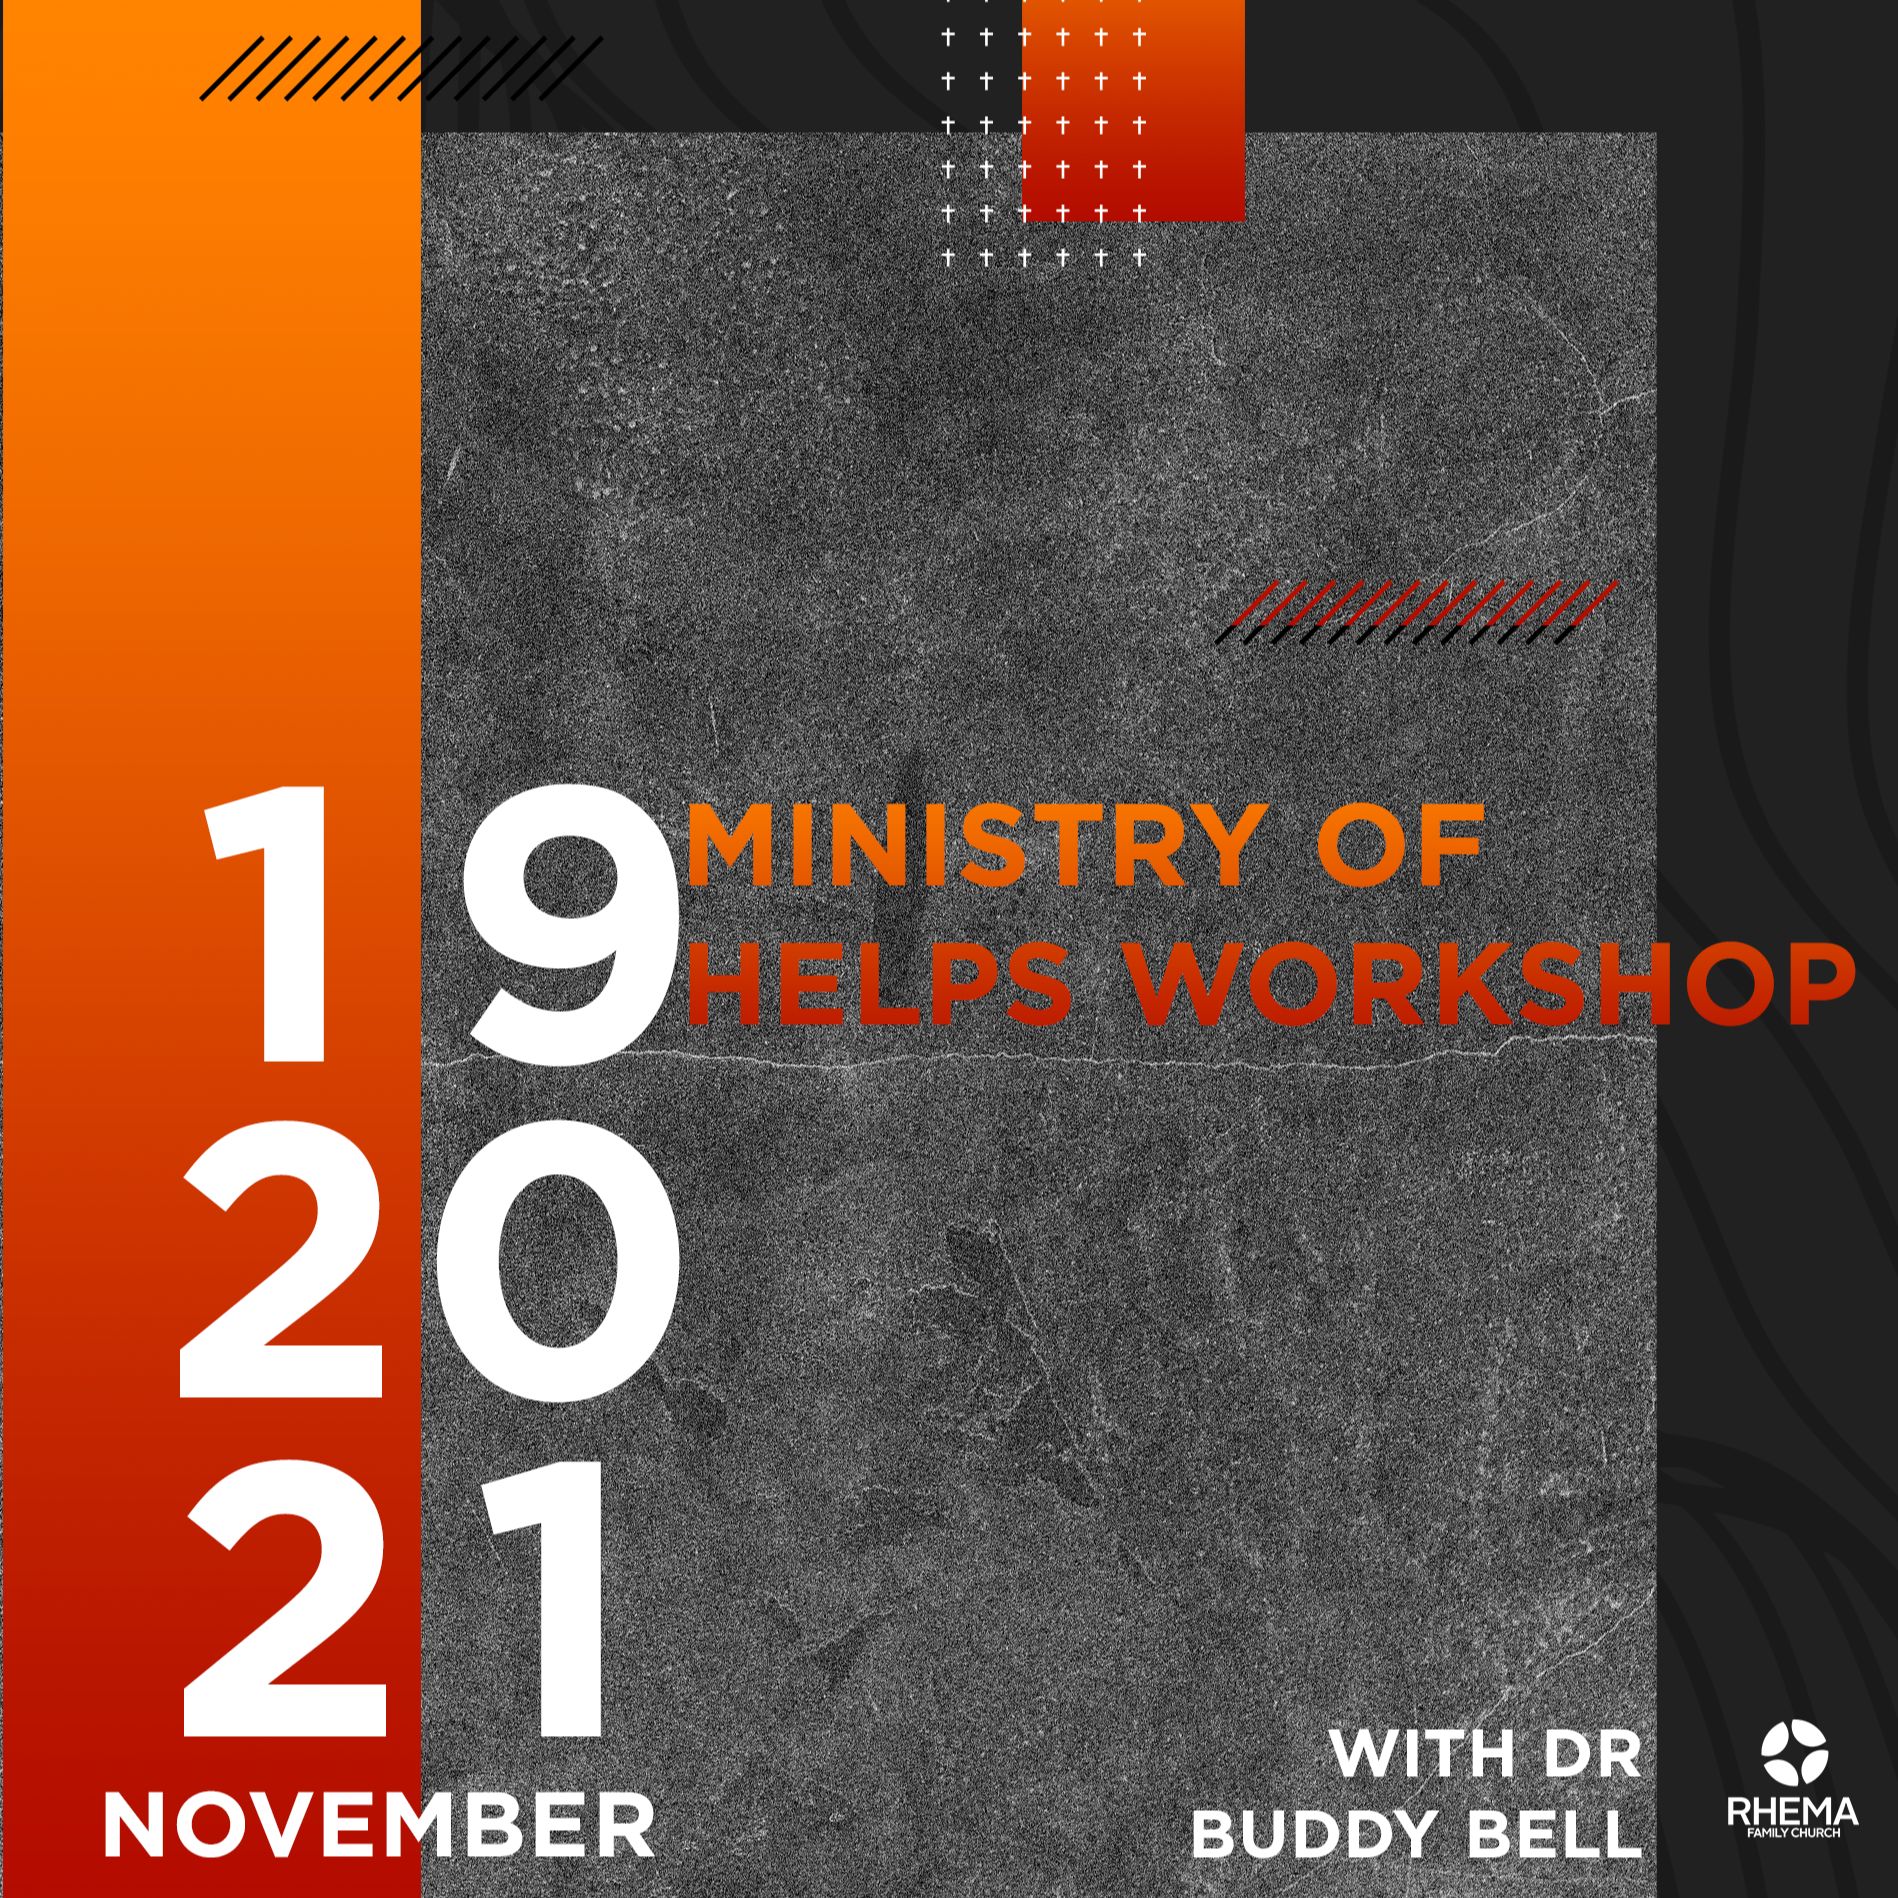 2. Ministry of Helps Workshop - Buddy Bell